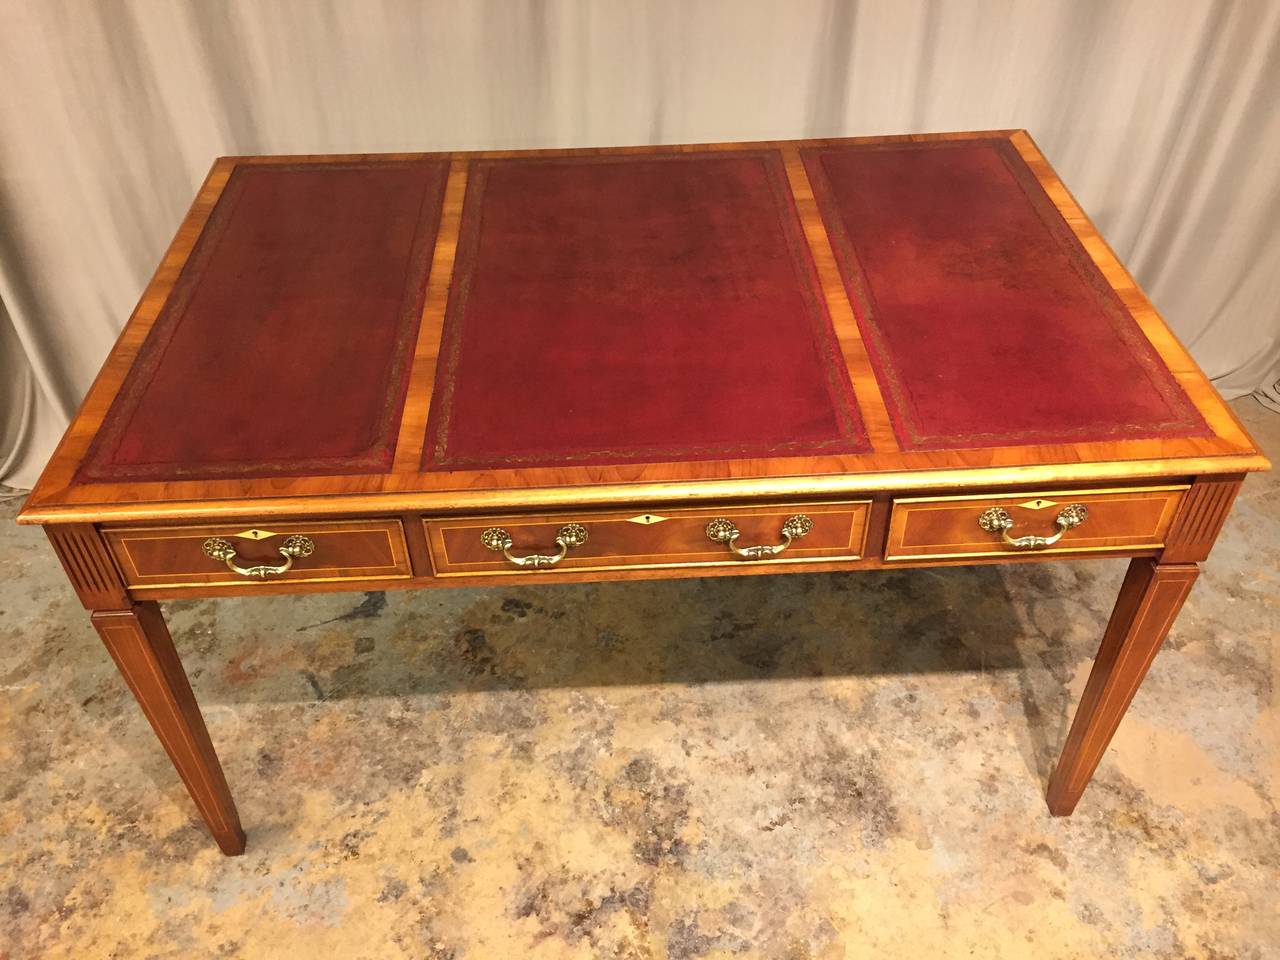 Very nice leather top late 19th century three drawer walnut and mahogany partners desk. Identical on both sides.  Only one side has drawers that pull out.  Original nicely worn leather tops. Inlaid line inlay with ivory escutcheons.